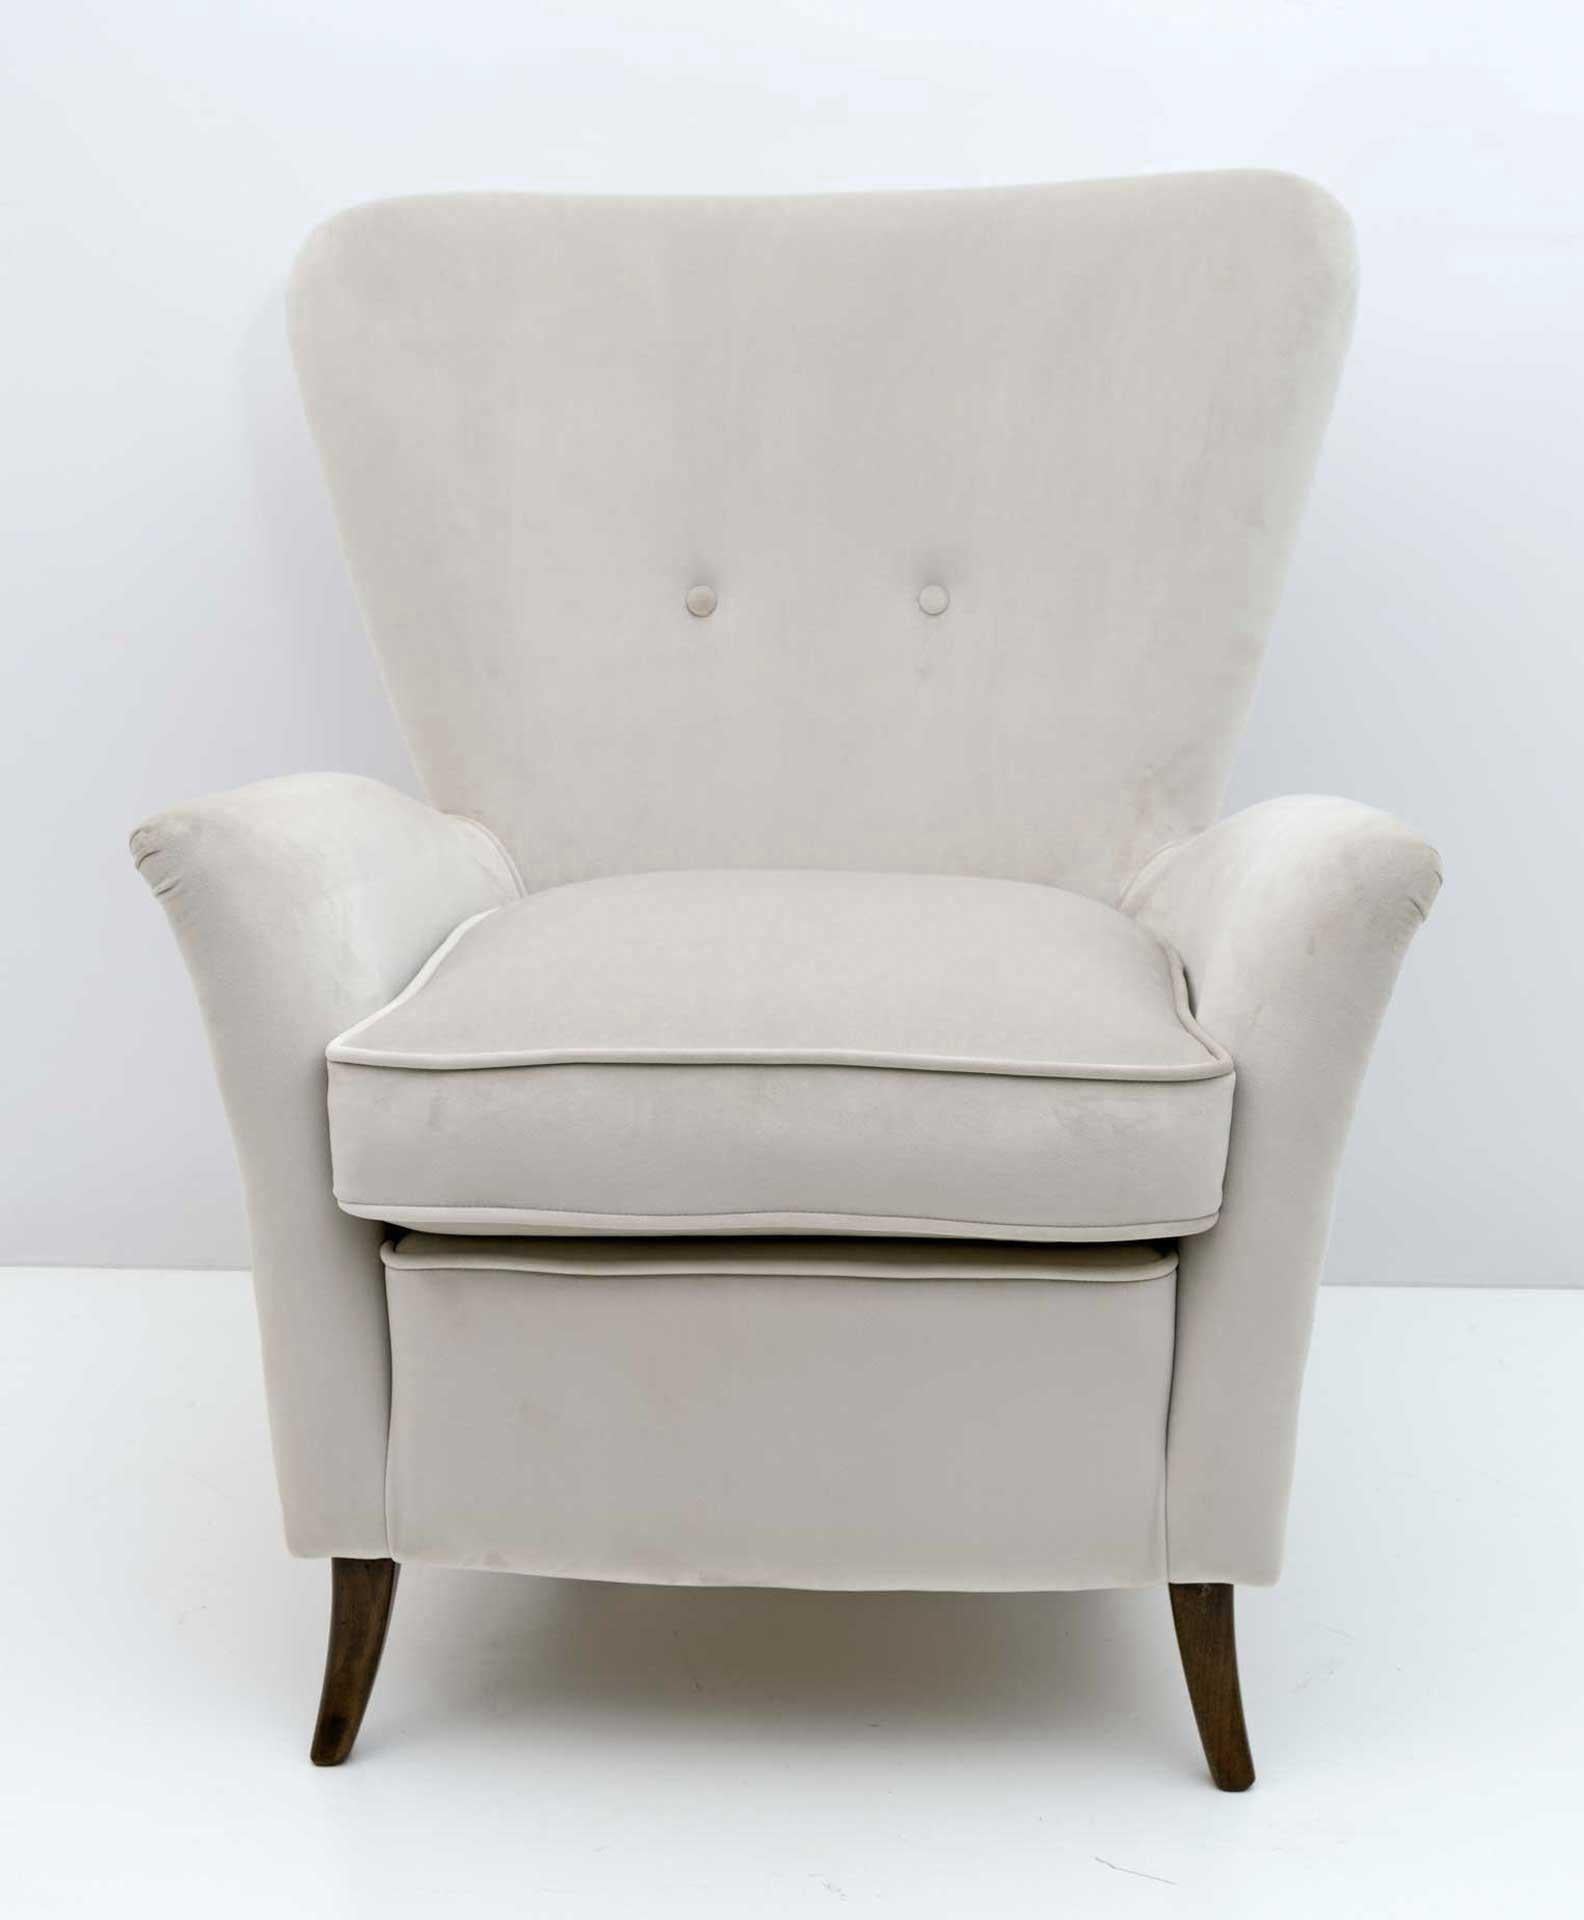 Luxurious Art Deco style armchair attributed by Gio Ponti for Hotel Bristol Merano Italy.
Lounge chair with low armrests with a sculptural shape.
Made in Italy in the early 1950s
Completely restored and reupholstered.